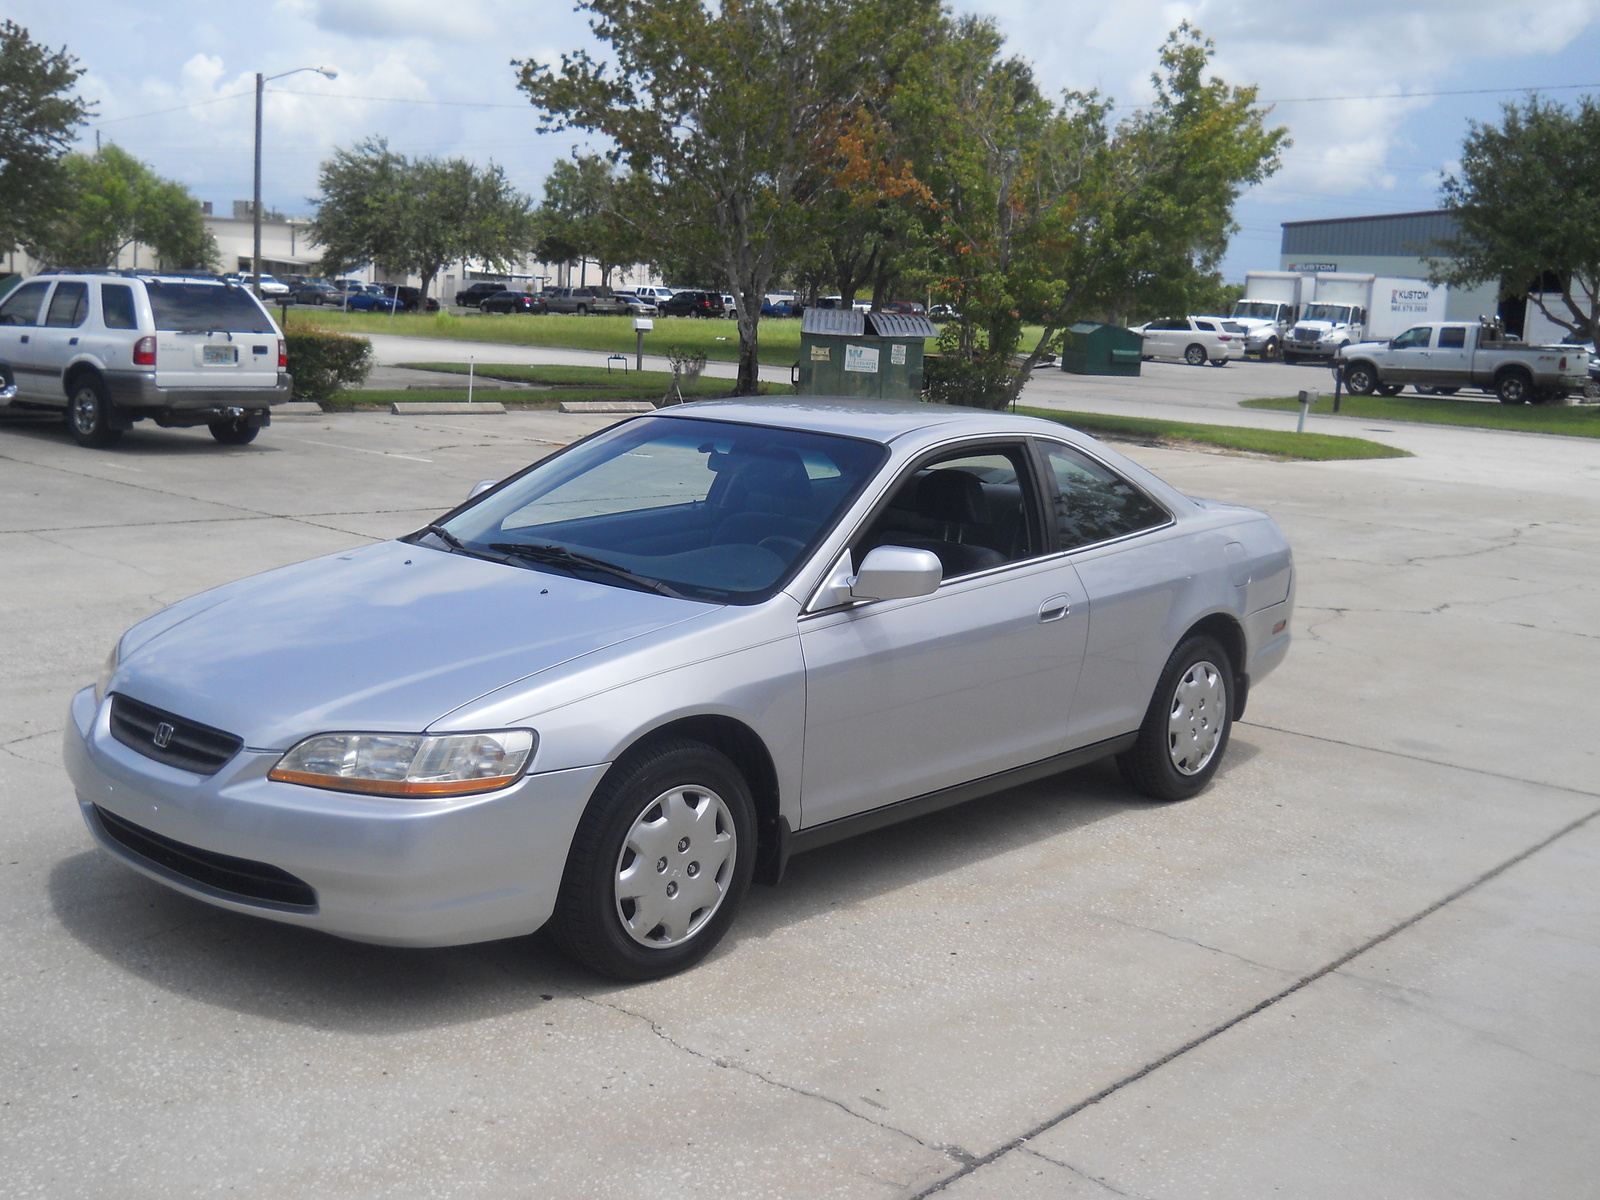 2000 Honda accord picture gallery